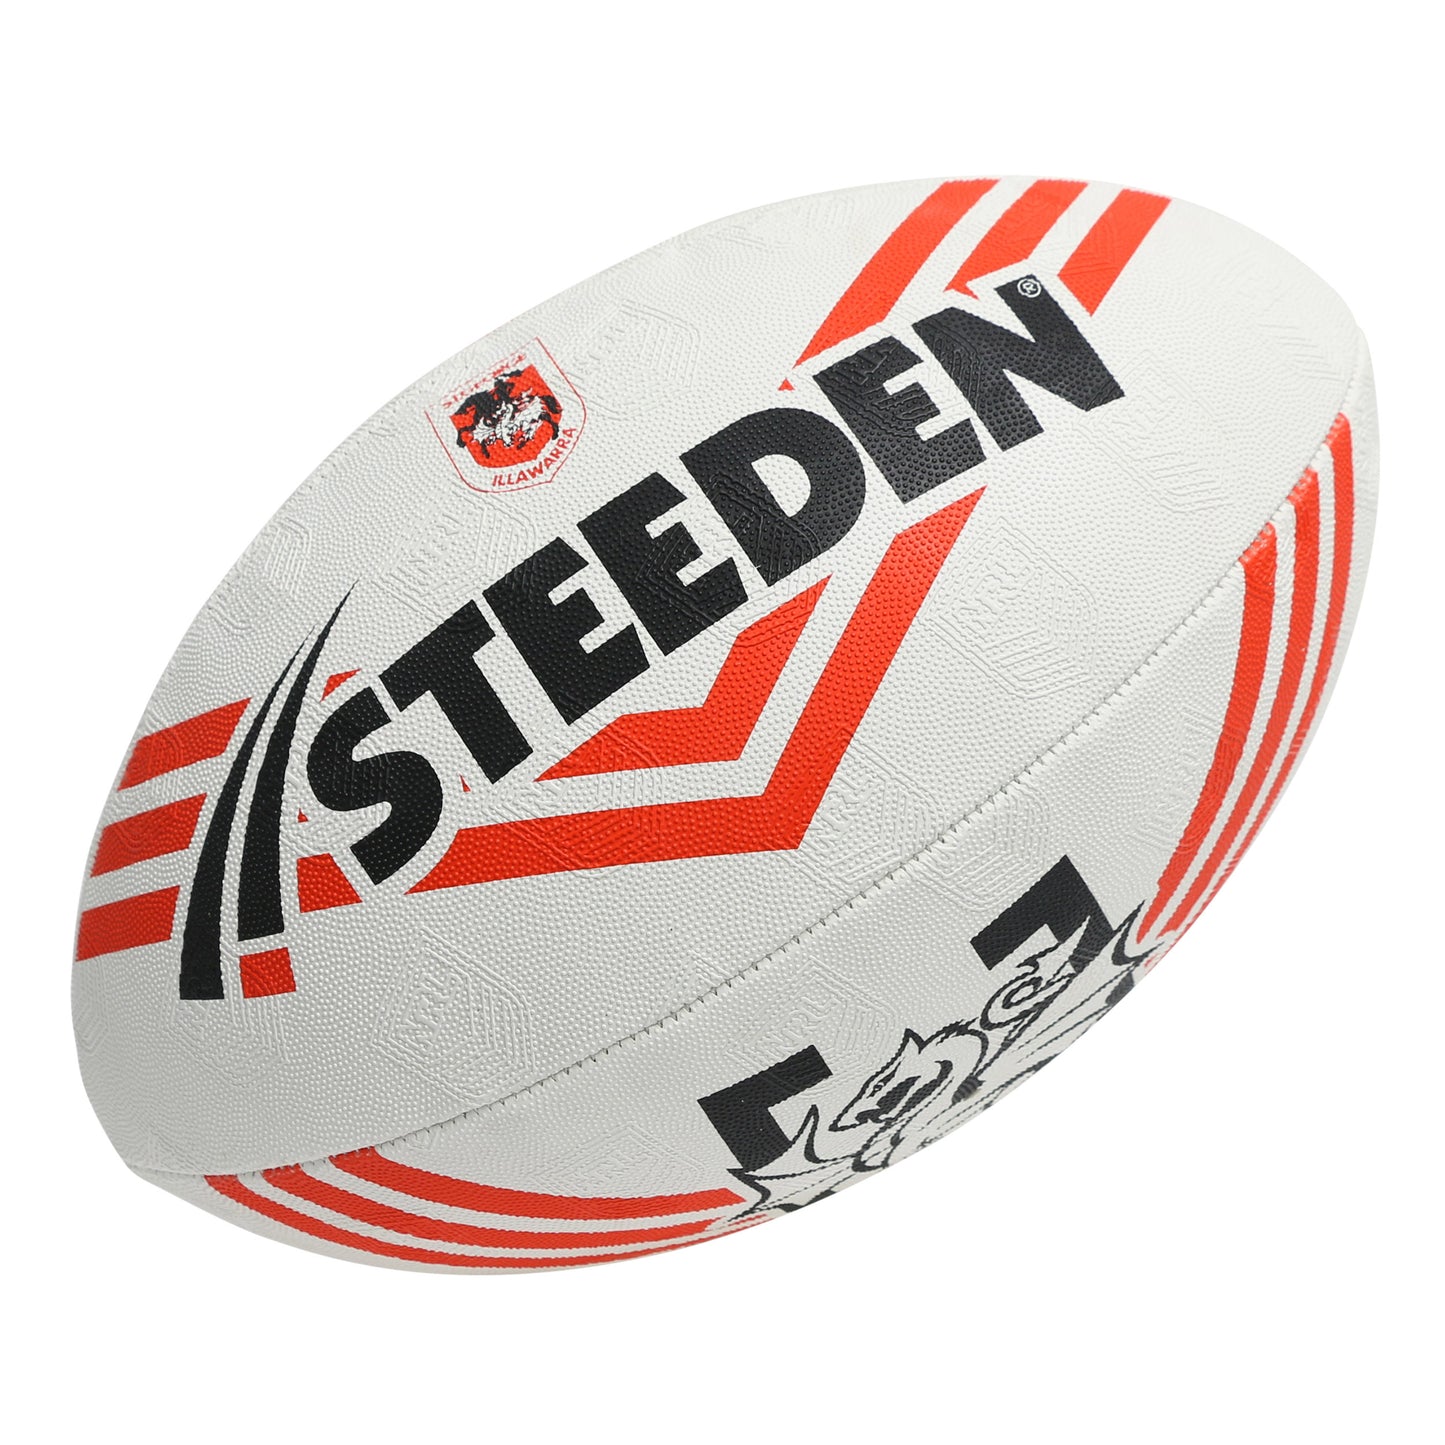 2023 NRL Dragons Supporter Ball (11 Inch)